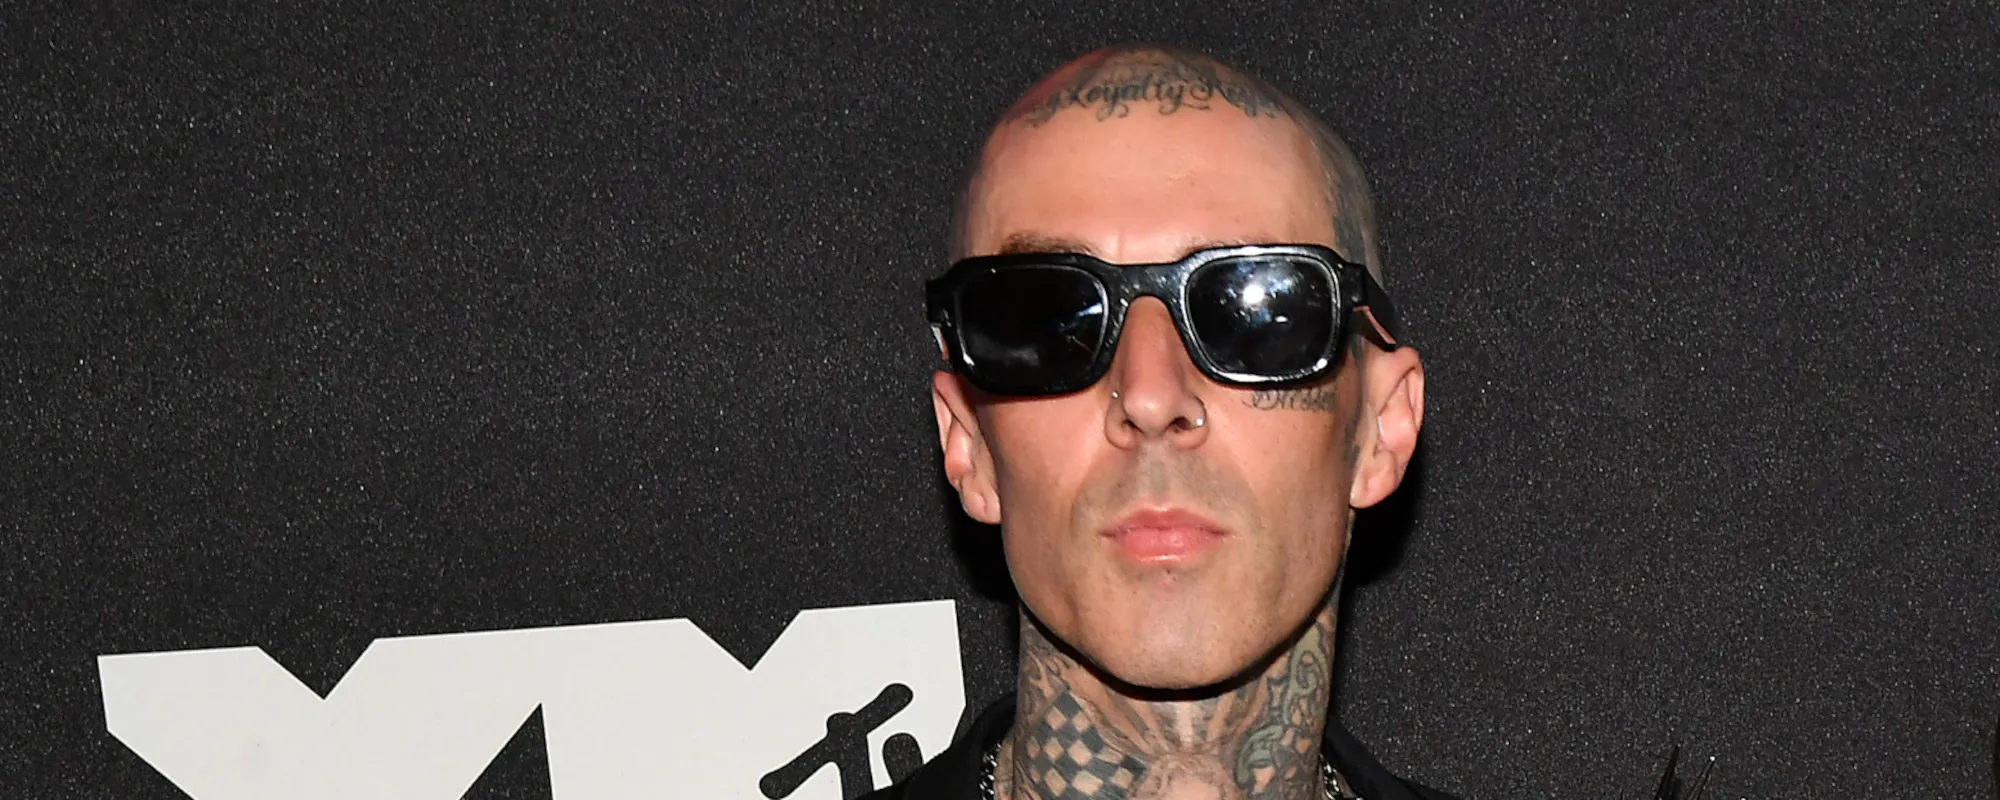 Travis Barker Returns to the Stage with MGK After Health Scare